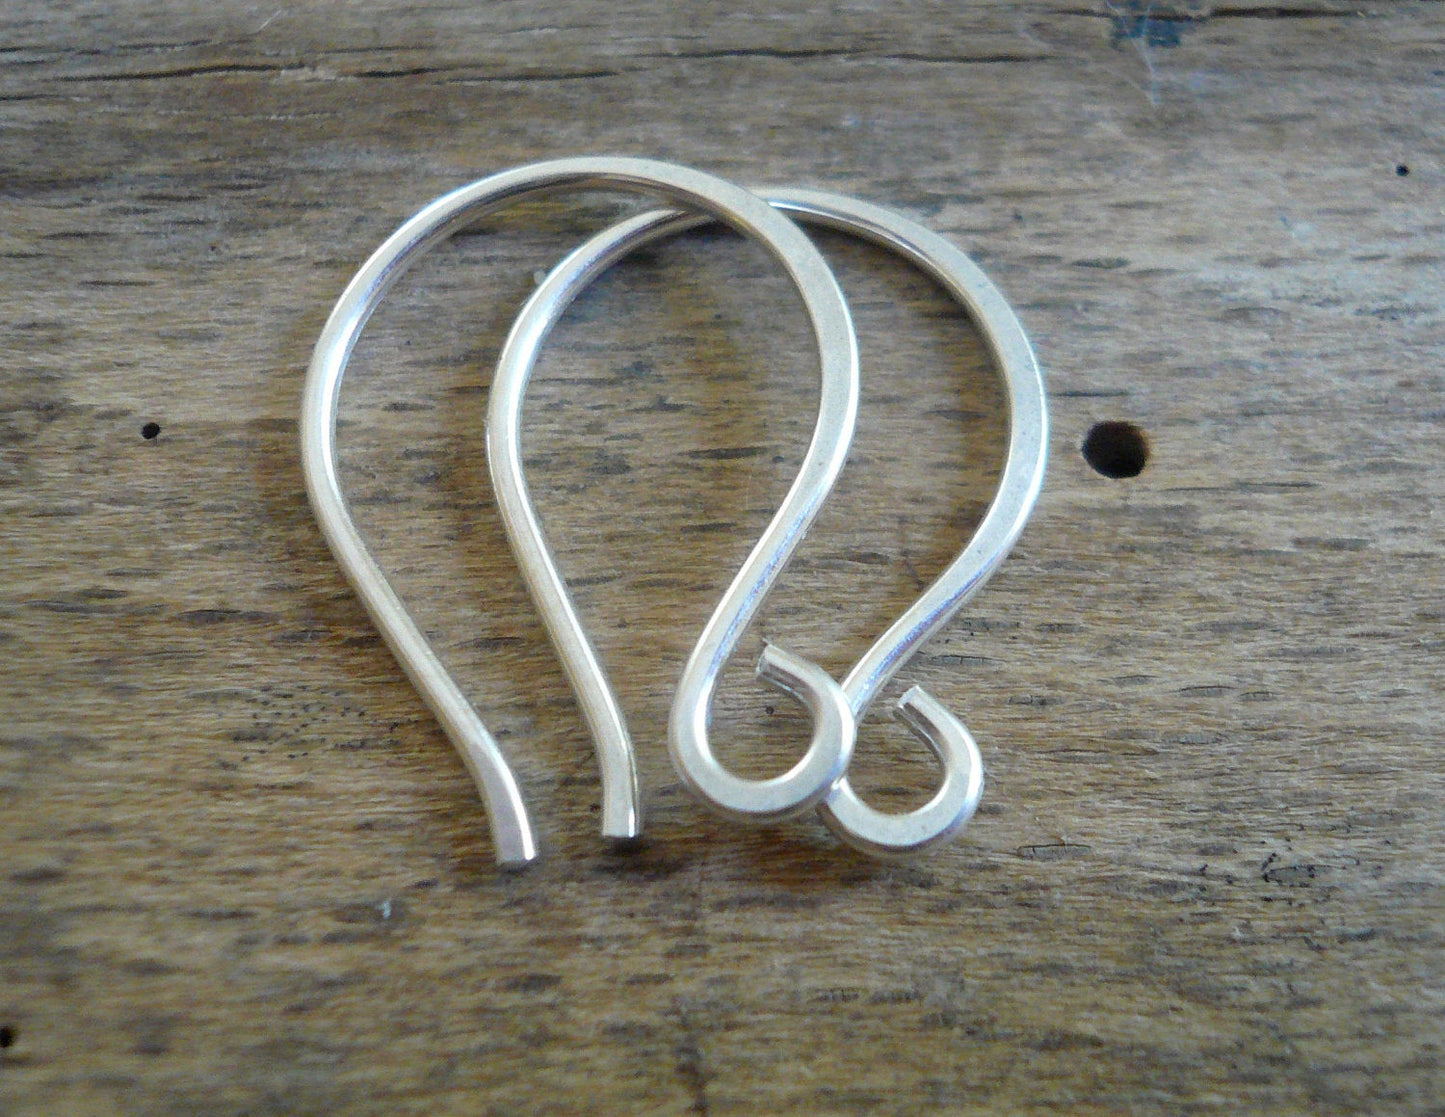 HEAVY 18 gauge Large Twinkle Sterling Silver Earwires - Handmade. Handforged. Oxidized/ polished